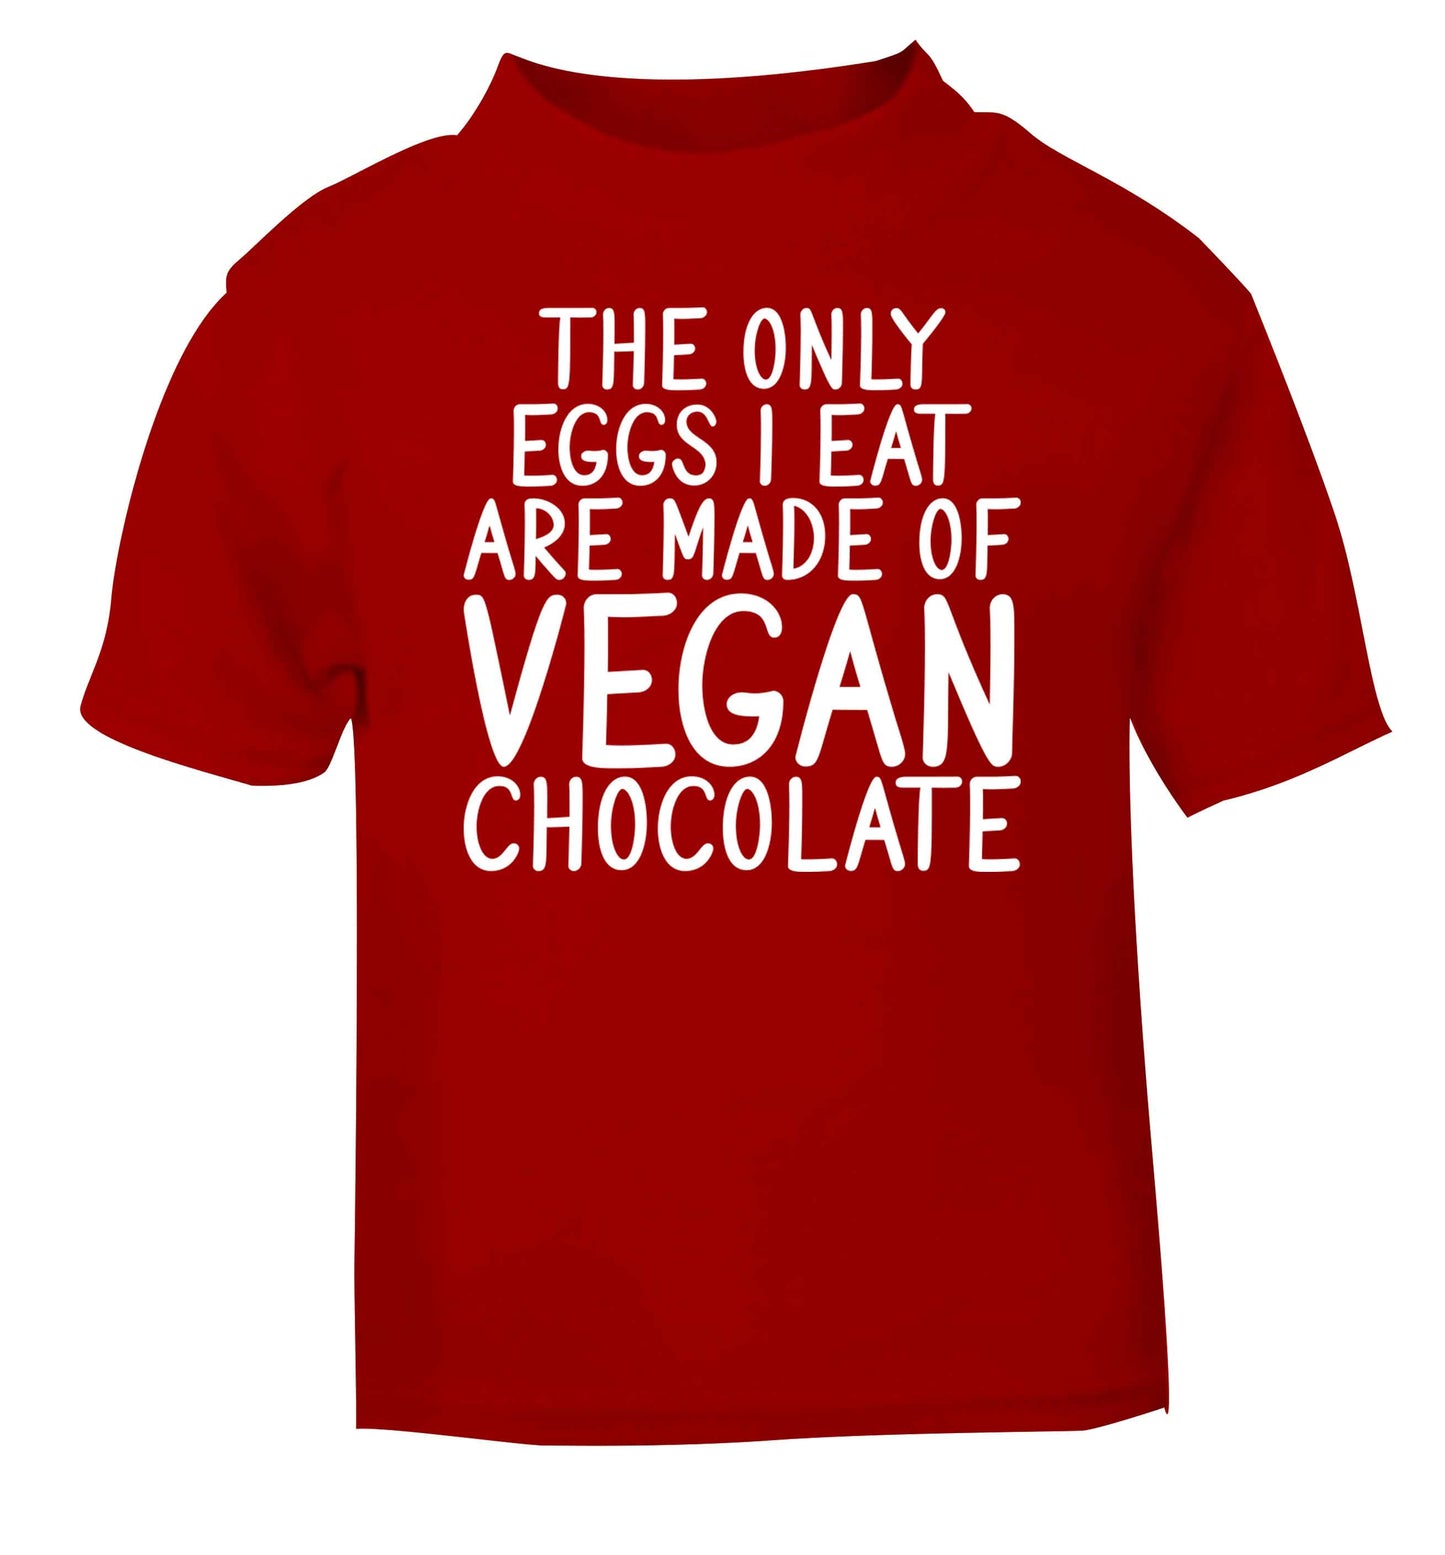 The only eggs I eat are made of vegan chocolate red baby toddler Tshirt 2 Years